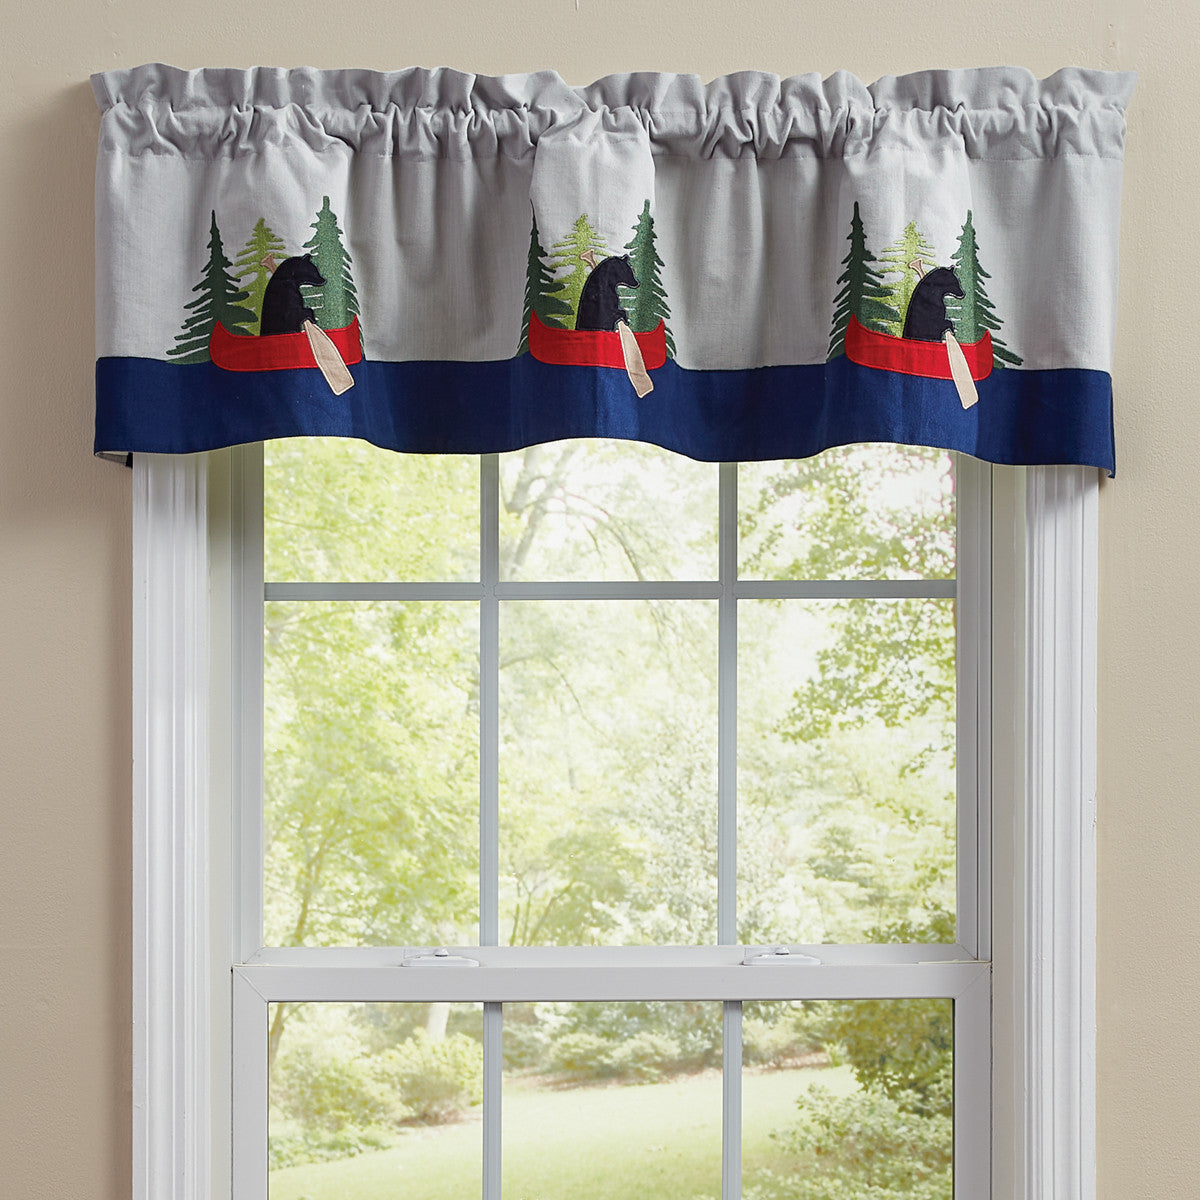 Boundary Waters Appliqued Valance 14"L - Set of 2 Park designs